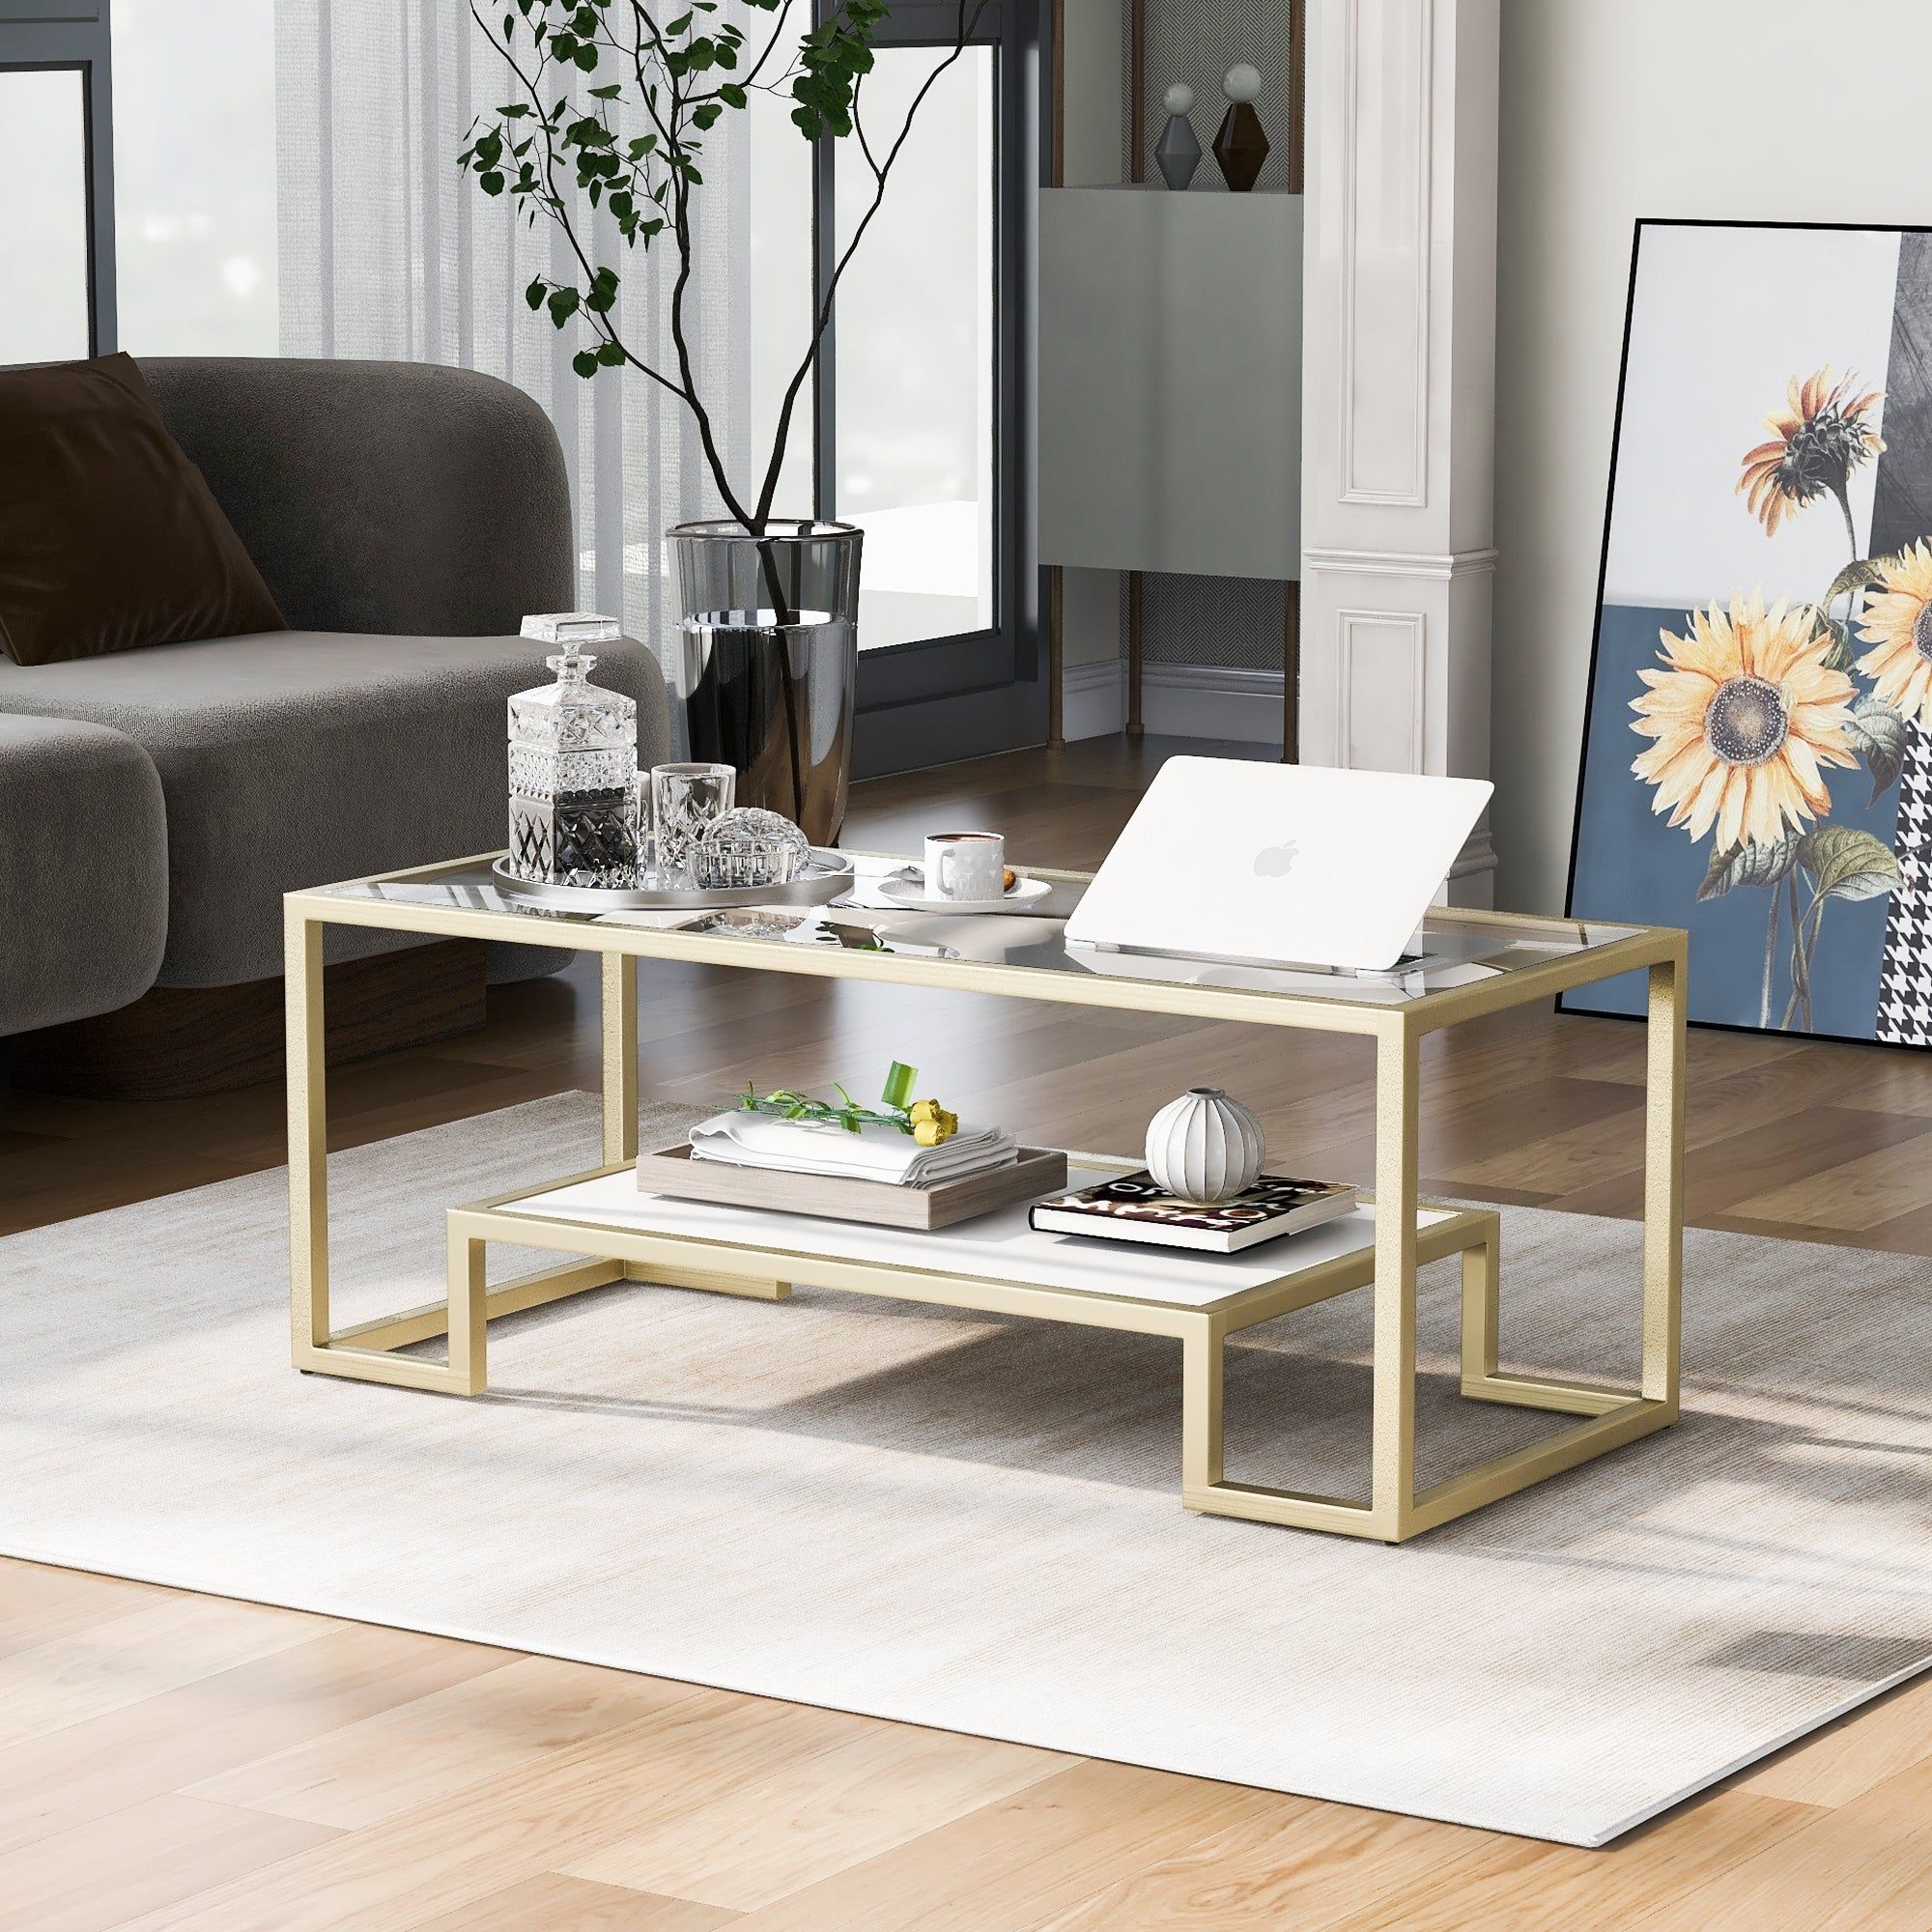 2 Tier Cocktail Tables Living Room Tempered Glass Coffee Table – Overstock  – 35464868 Throughout Modern 2 Tier Coffee Tables Coffee Tables (View 3 of 20)